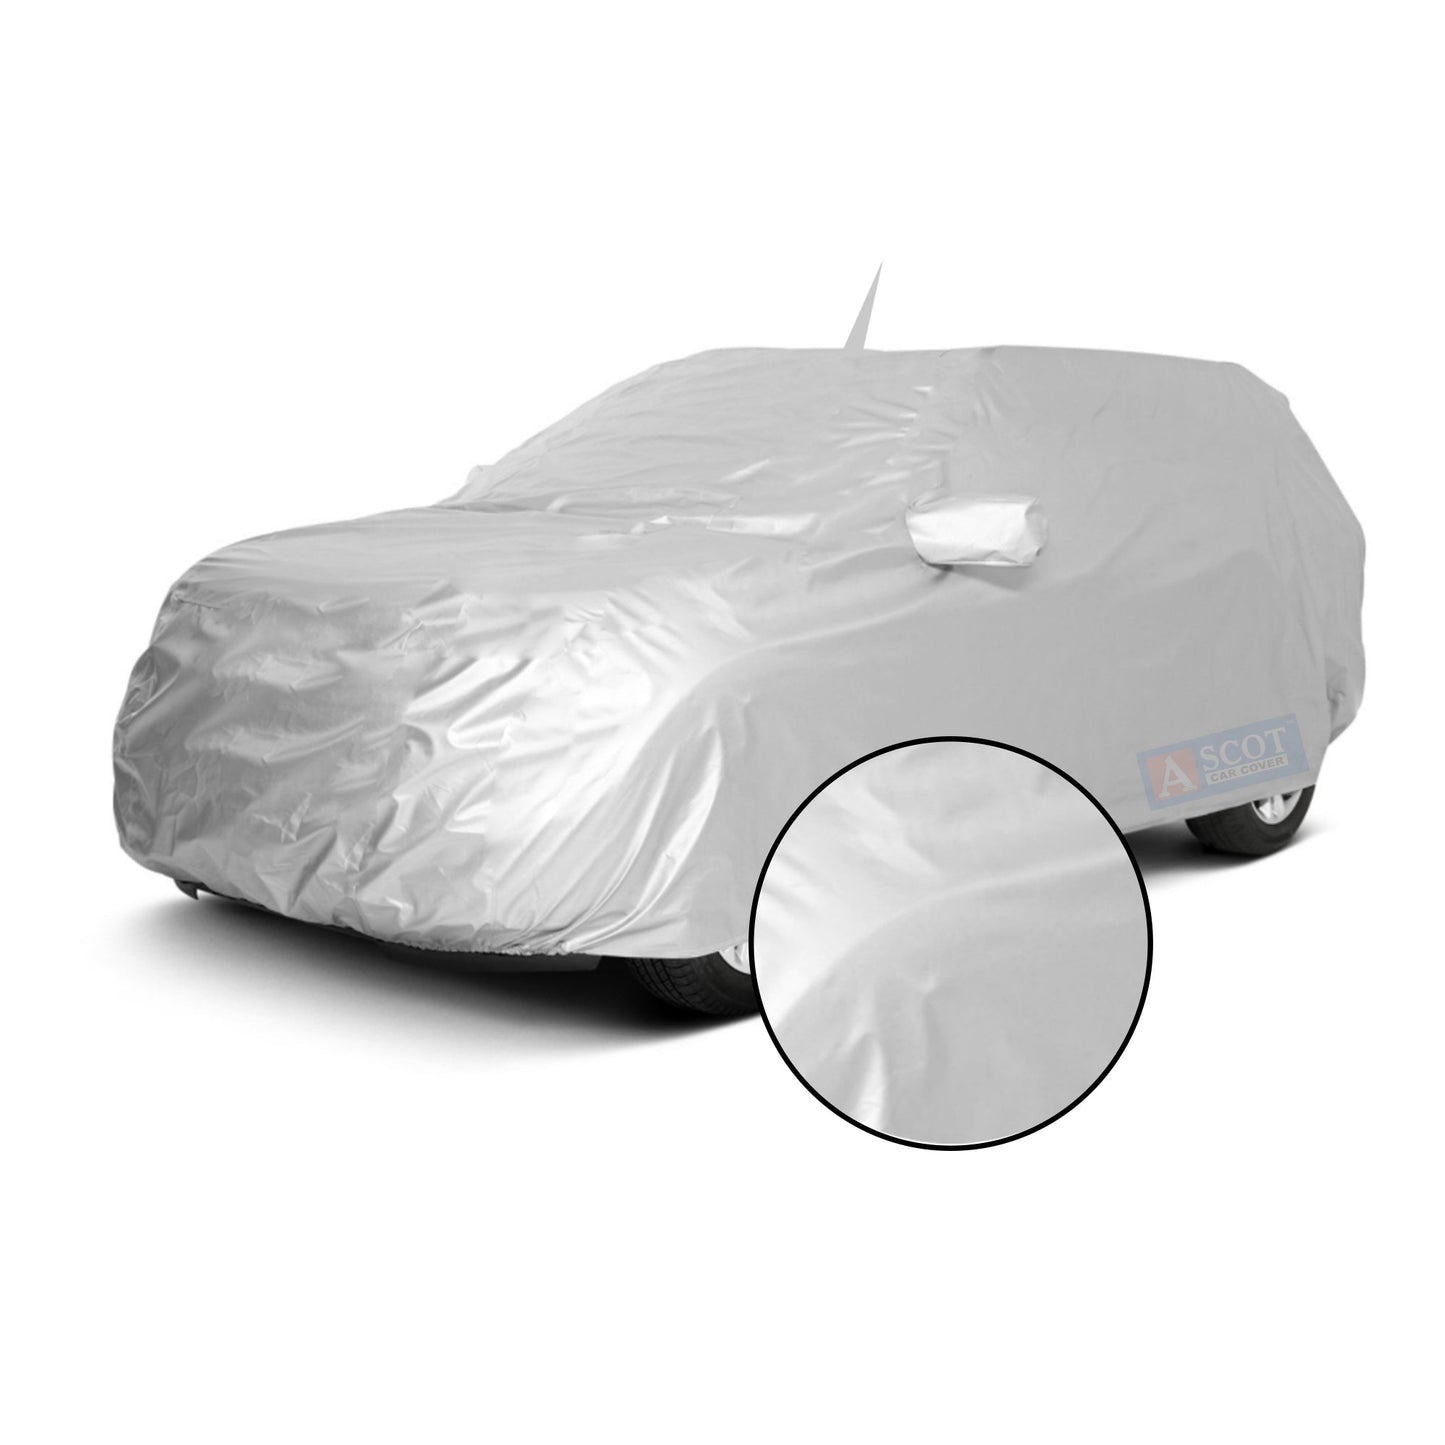 Ascot MG Astor Car Body Cover Dust Proof, Trippel Stitched